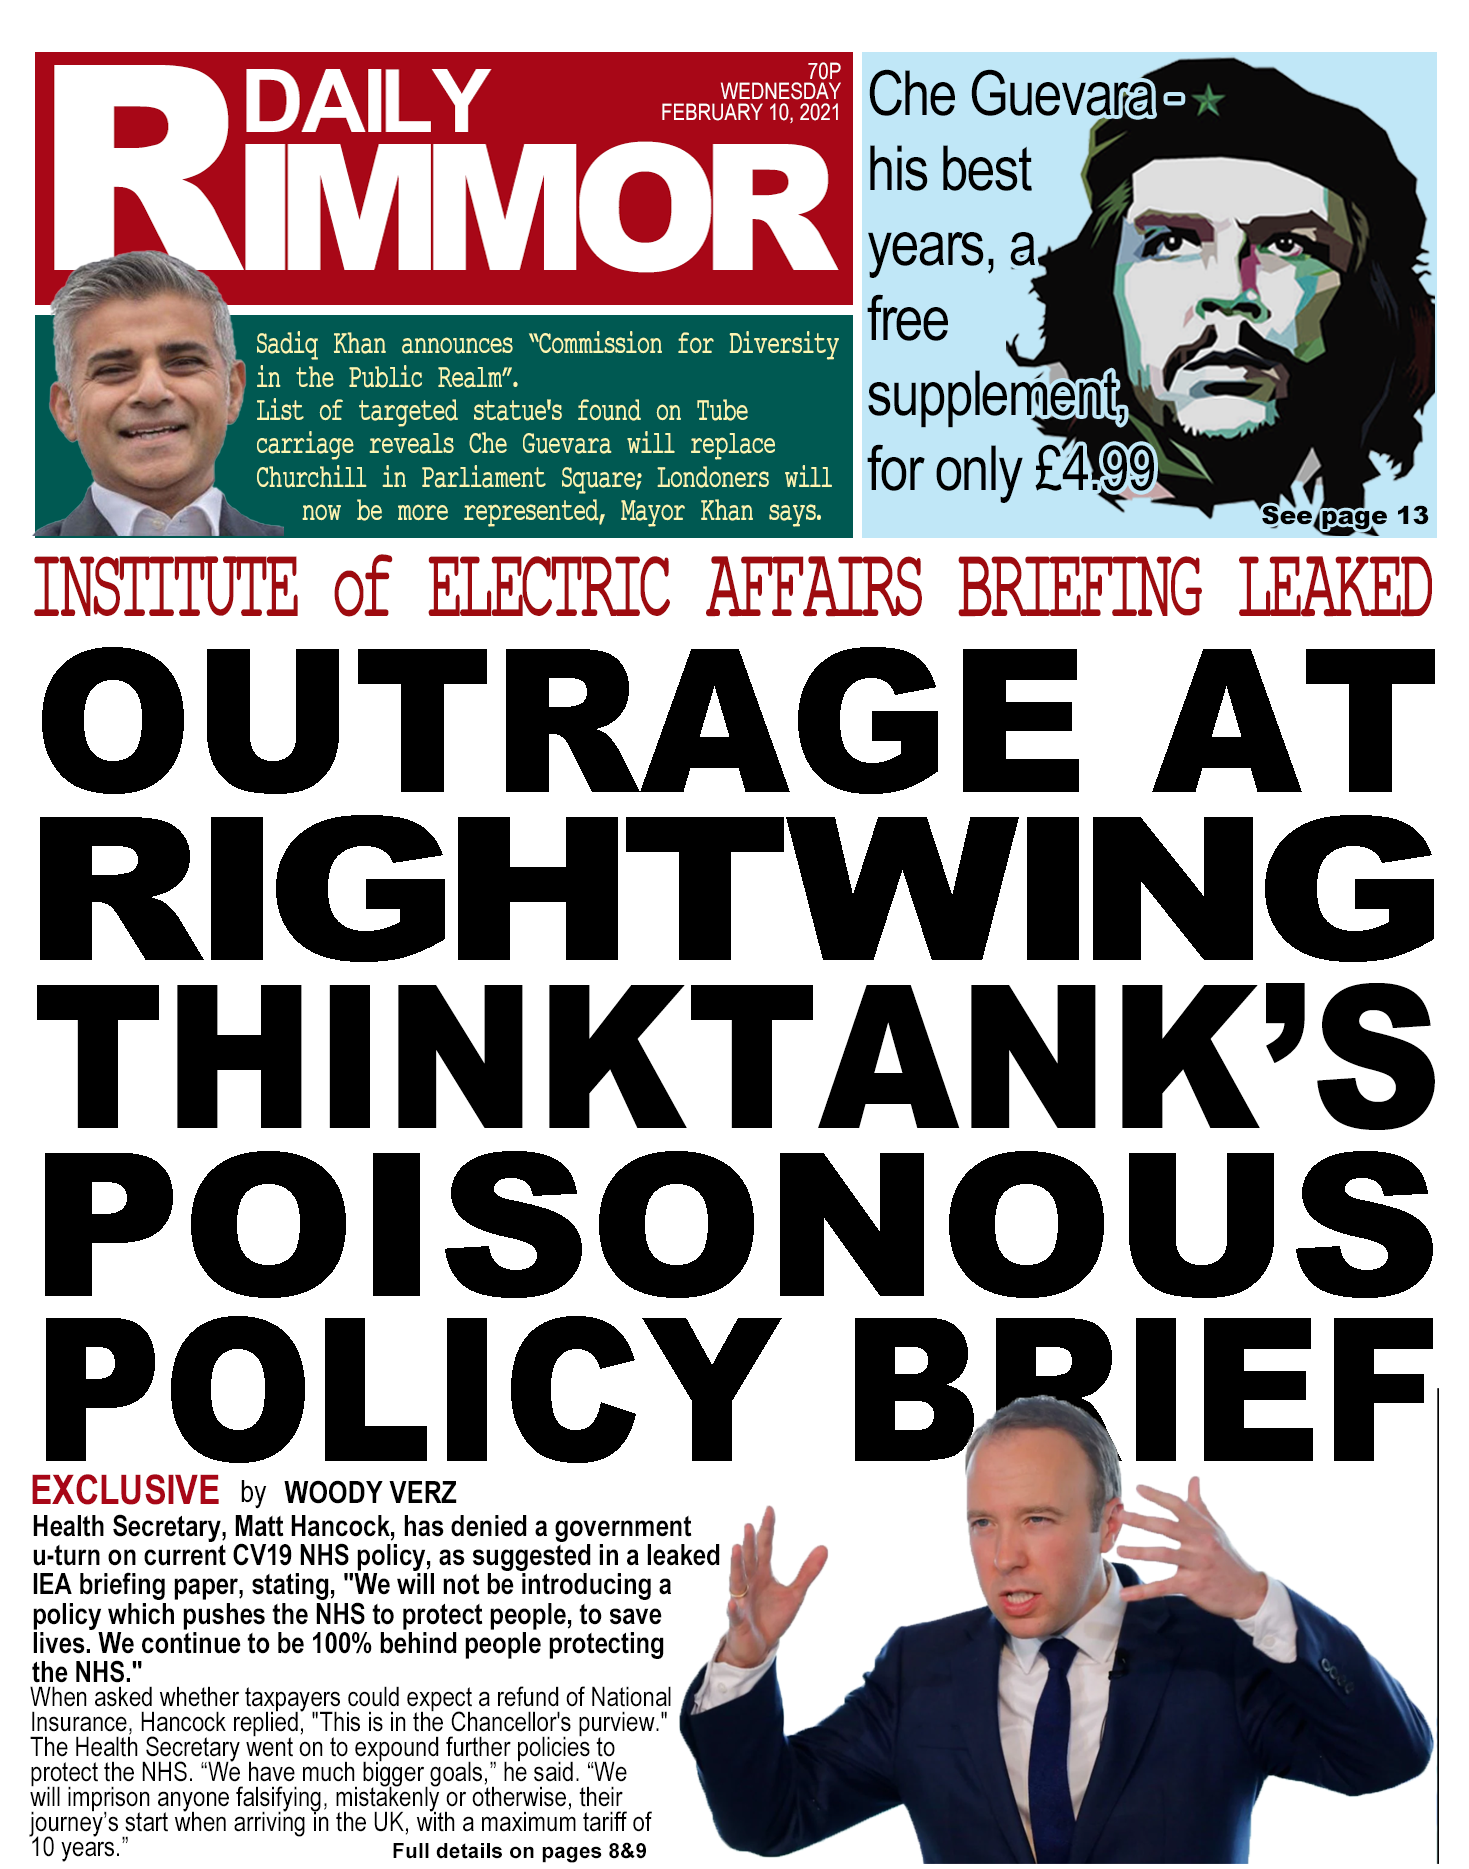 Daily Rimmor front page. COVID-19, Wednesday 10 February